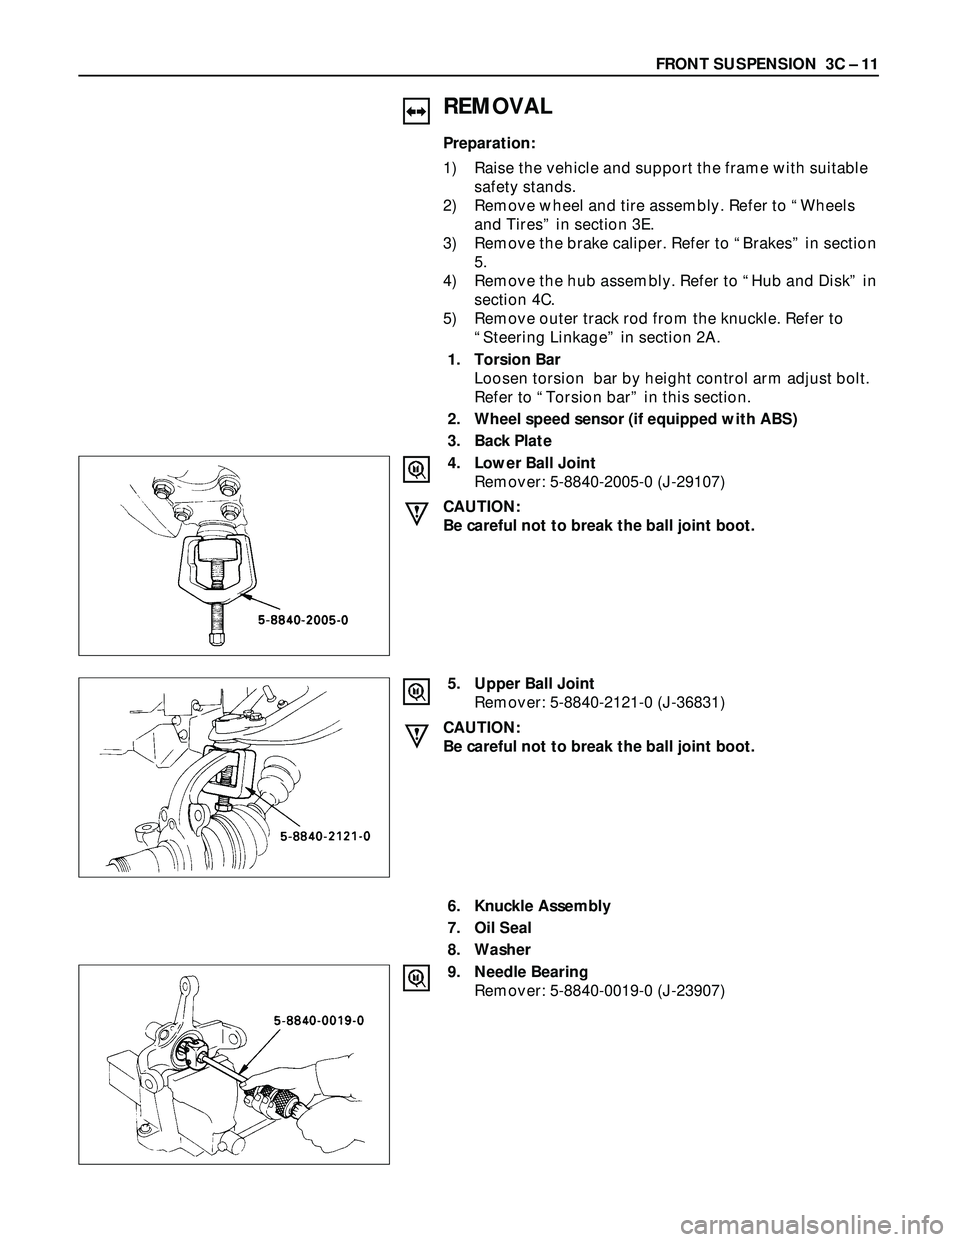 ISUZU TROOPER 1998  Service User Guide FRONT SUSPENSION  3C – 11
REMOVAL
Preparation:
1) Raise the vehicle and support the frame with suitable
safety stands.
2) Remove wheel and tire assembly. Refer to “Wheels
and Tires” in section 3